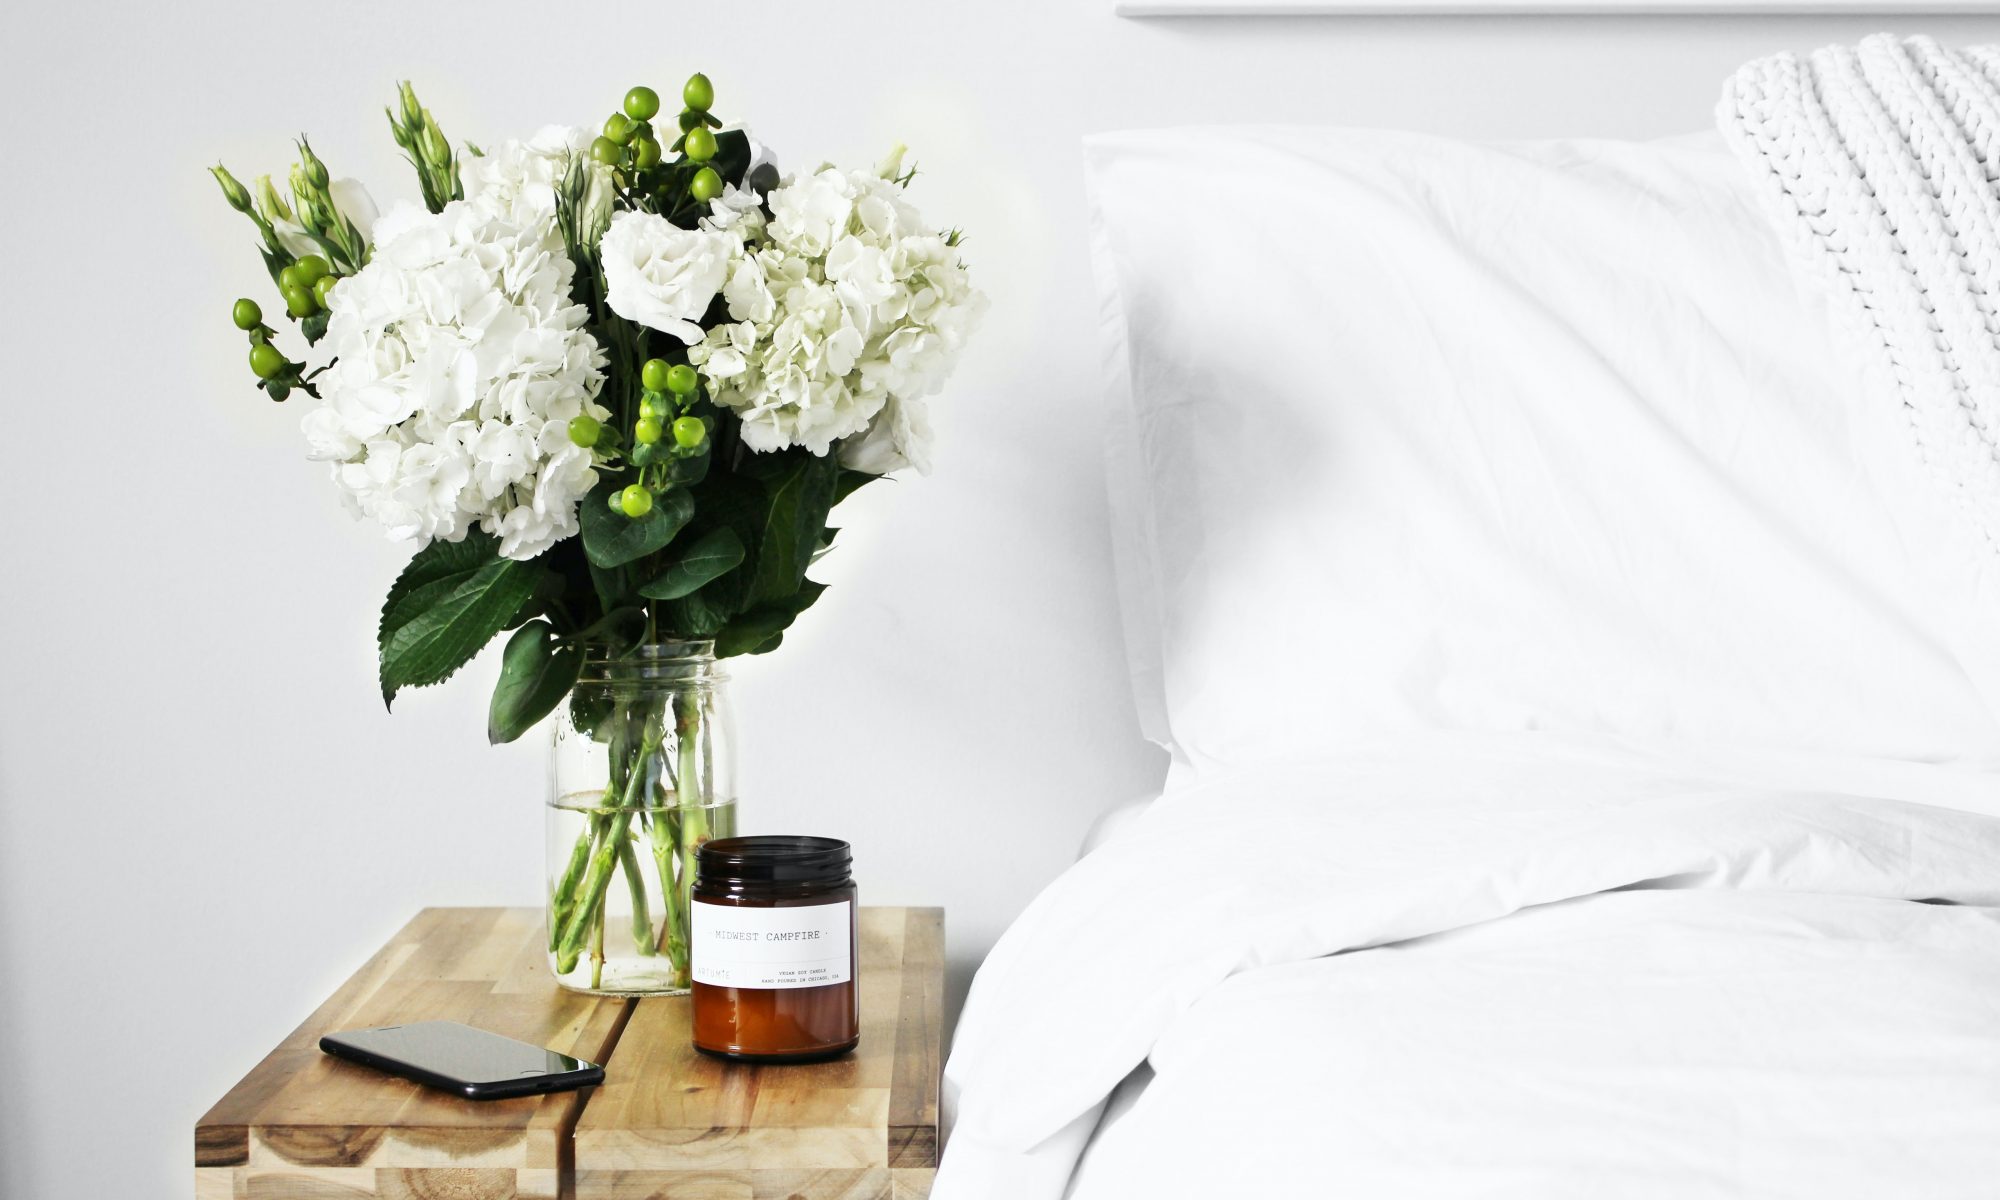 Photo of a bed with white linen, vase sitting on a table next to it